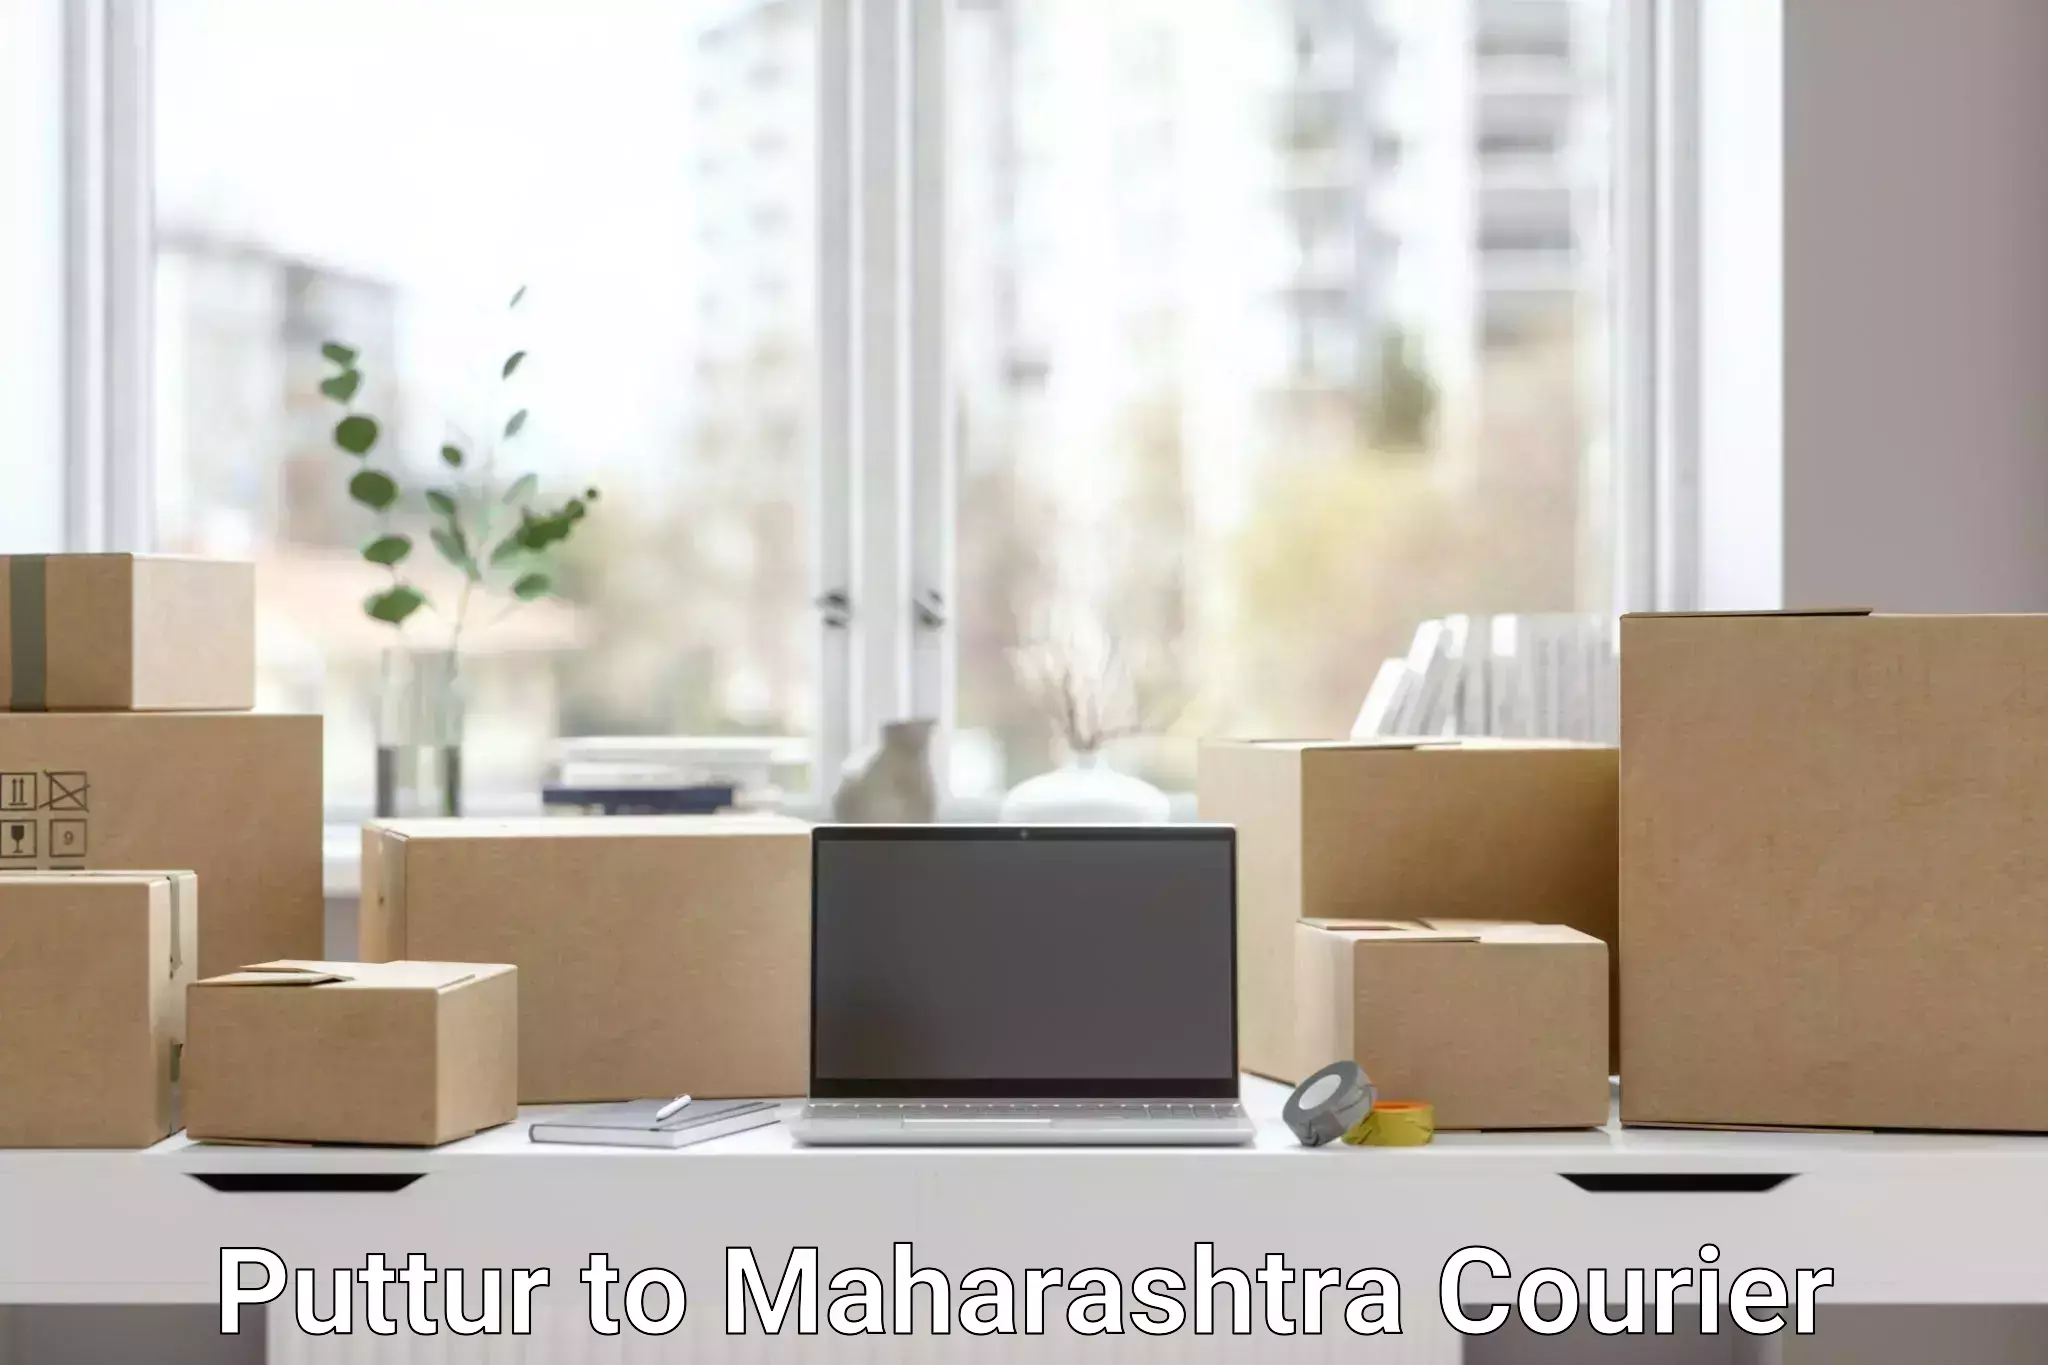 Flexible delivery schedules Puttur to Kalyan Dombivli